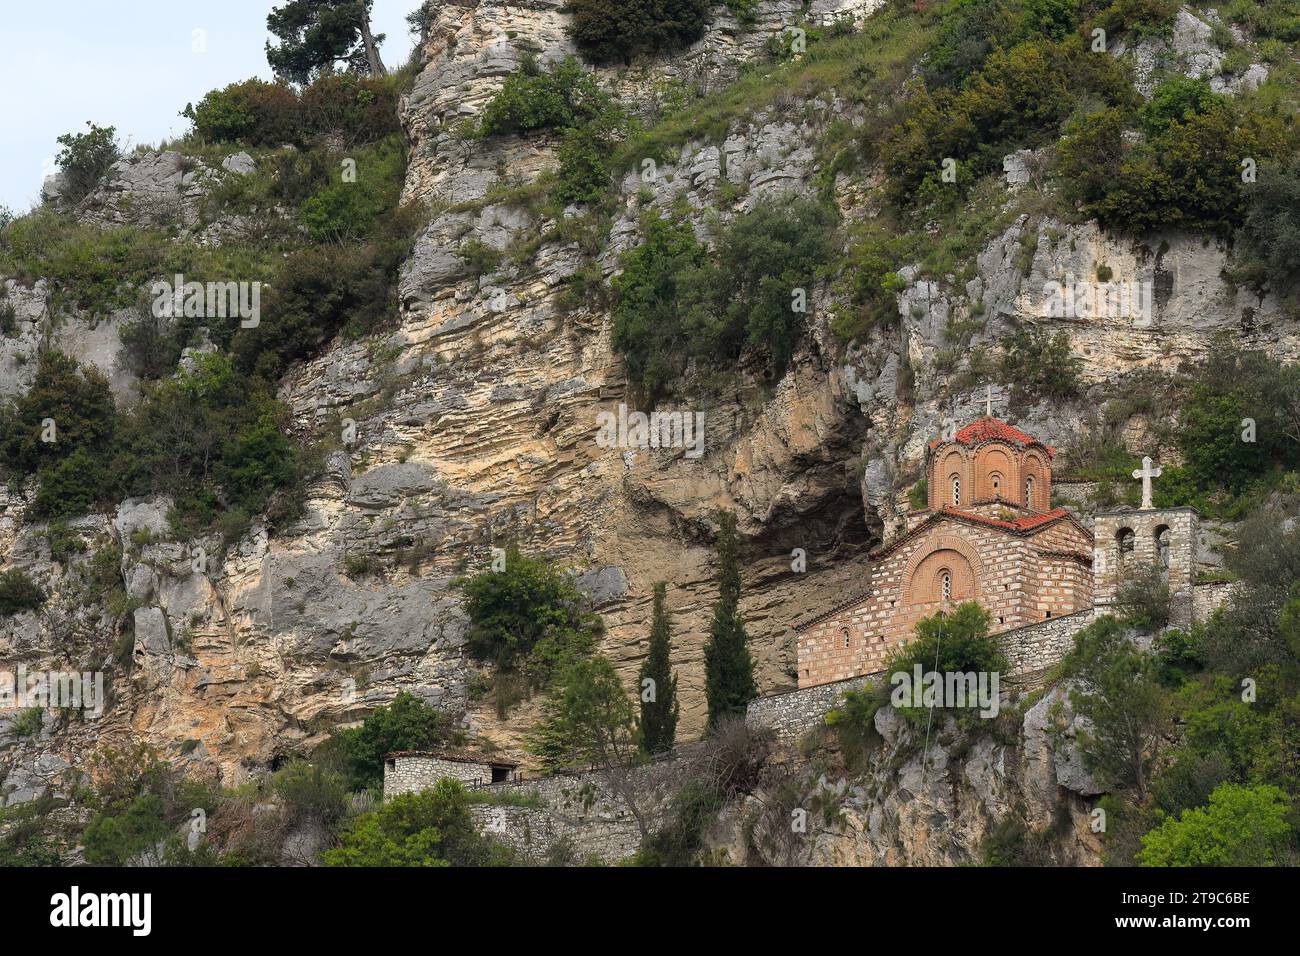 067 Medieval, Byzantine, XIV century St. Michael's Church built on the cliffside above the river and below the castle. Berat-Albania. Stock Photo